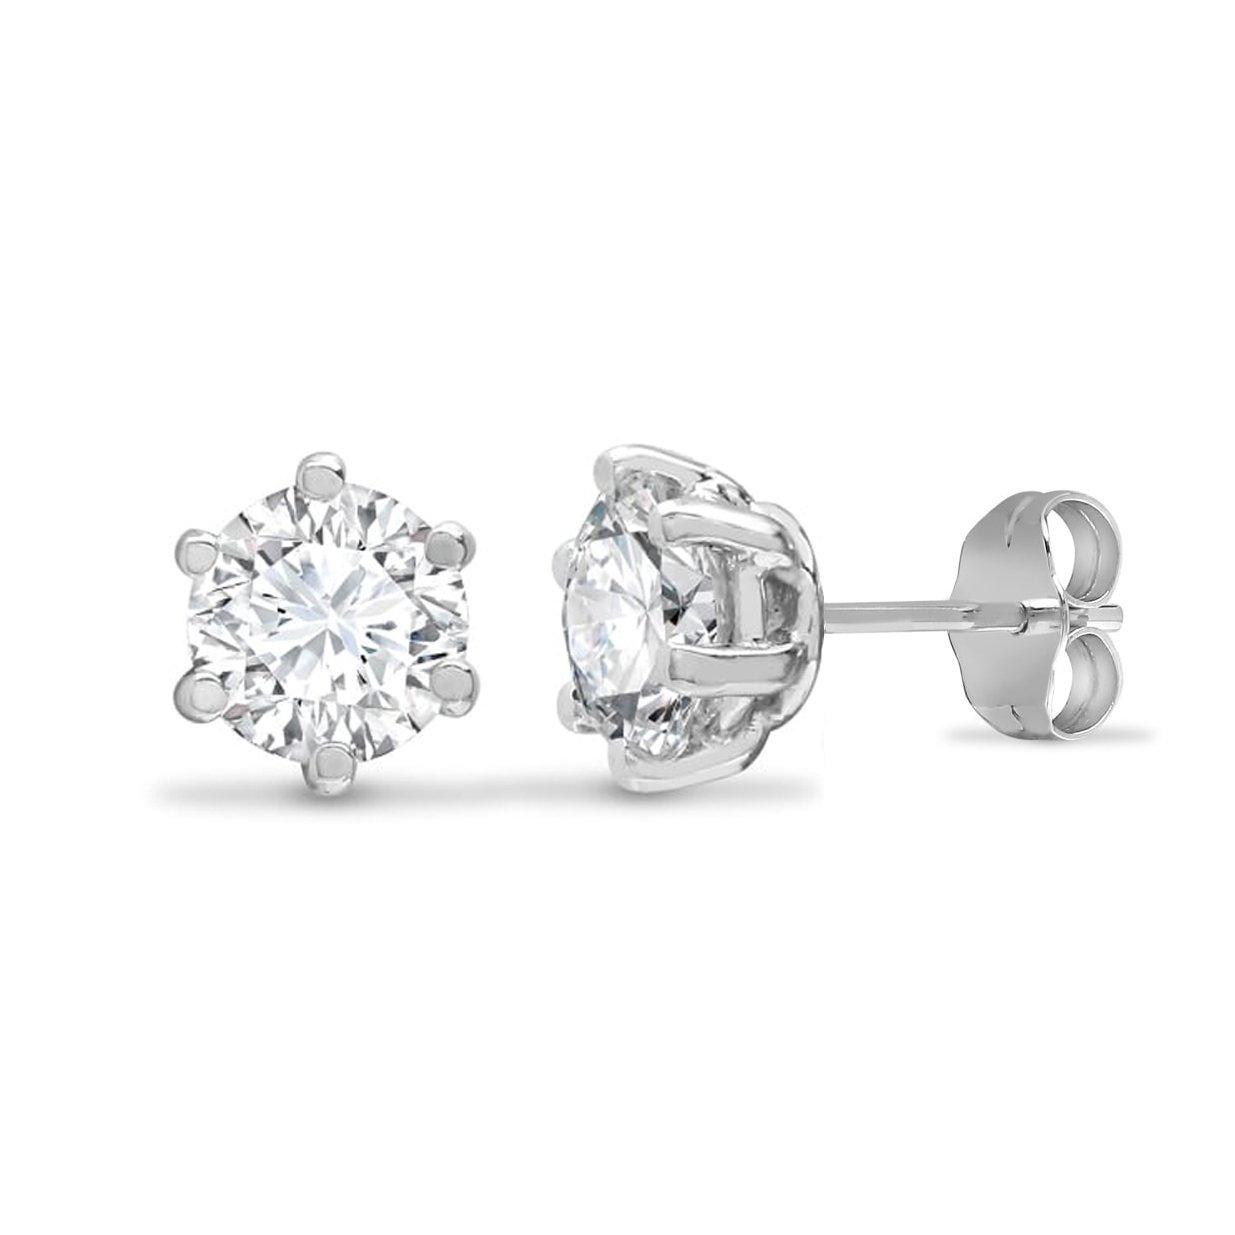 9ct White Gold  CZ 6 Claw Solitaire Stud Earrings, 5mm - JES177